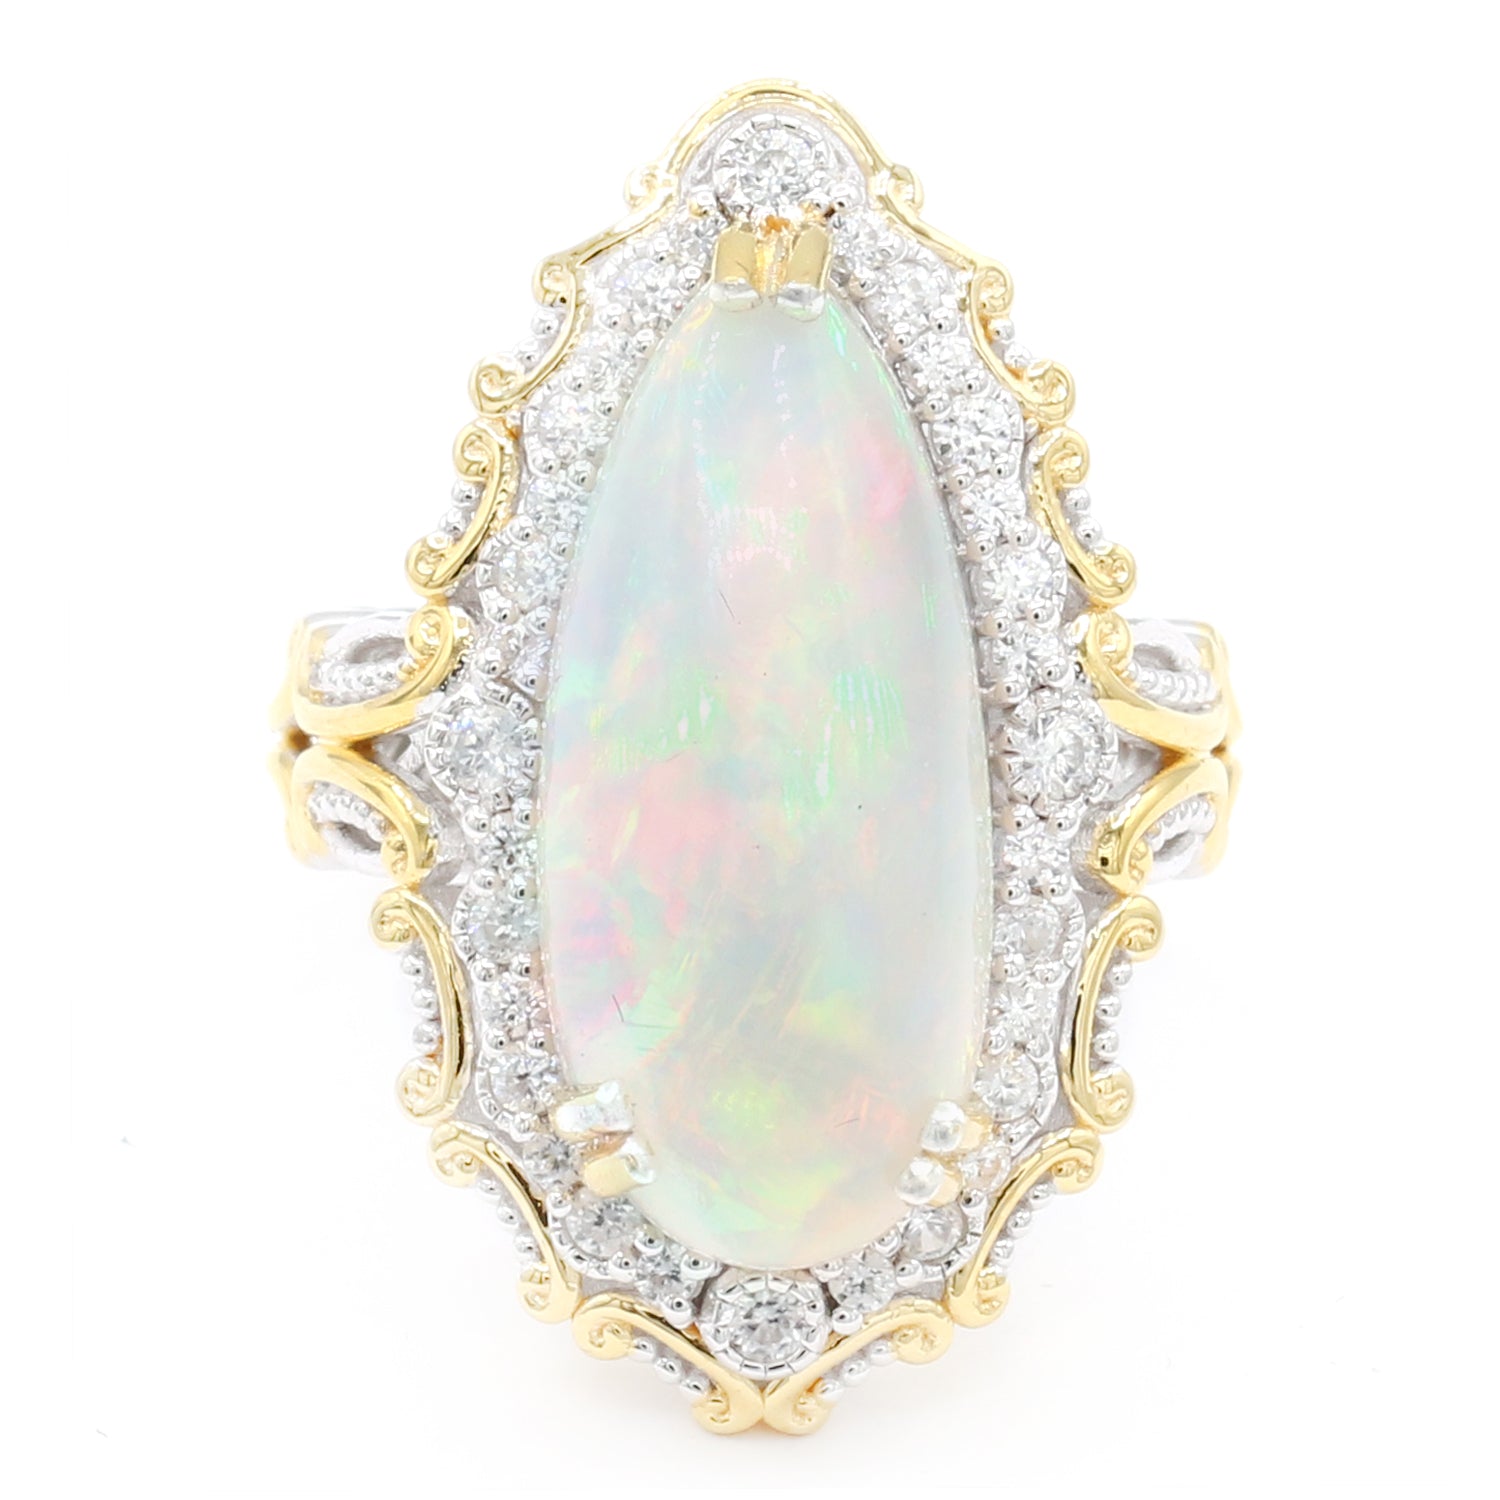 Limited Edition Gems en Vogue Luxe, One-of-a-Kind 12.15ctw Ethiopian Opal & White Zircon Halo Ring